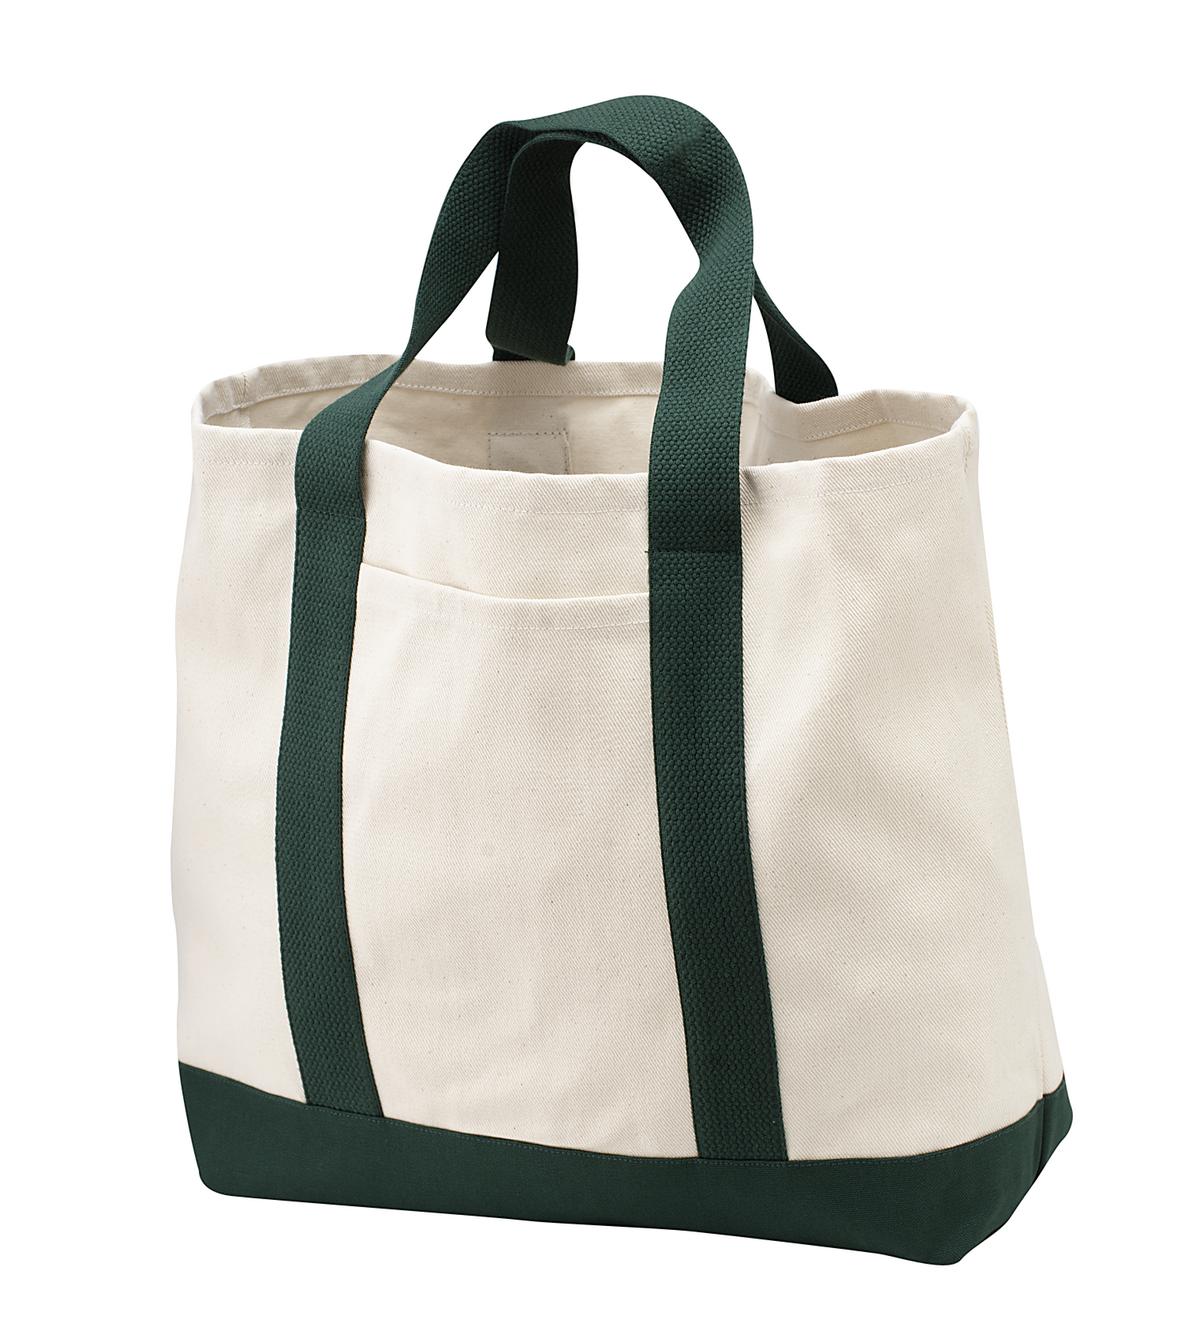 Port Authority® - Ideal Twill Two-Tone Shopping Tote. B400 - DFW Impression